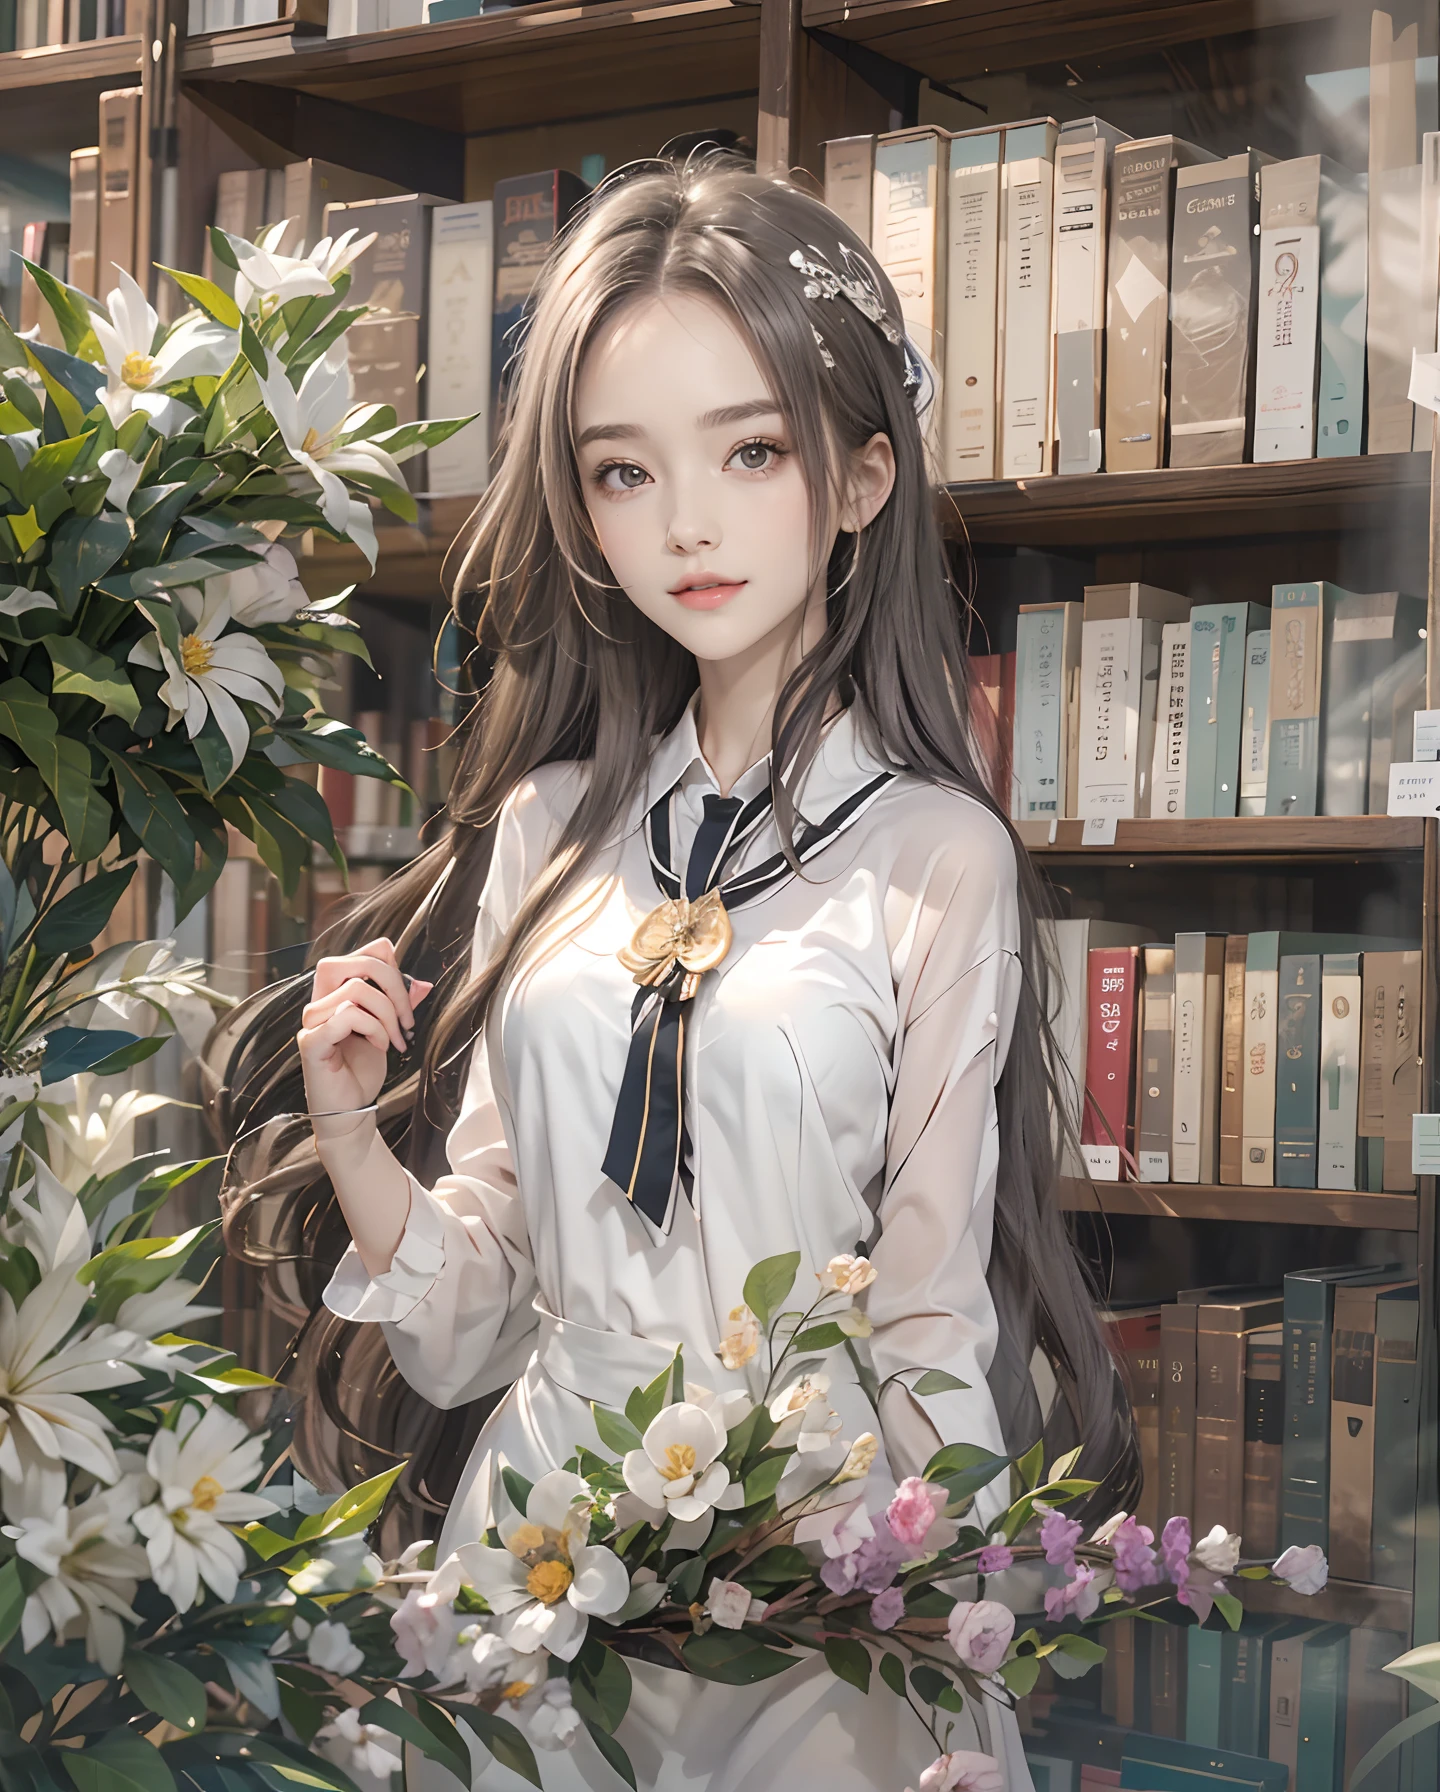 masutepiece、hight resolution、Library Reception、Library staff、scrivener、30-year-old girl、１Girl clerk、Looking at the camera、smil、Finish as shown in the photo、Flowers and girls、the skin is white and beautiful、Hair is long and beautiful、inner colored、Hair should be tied back、A slender